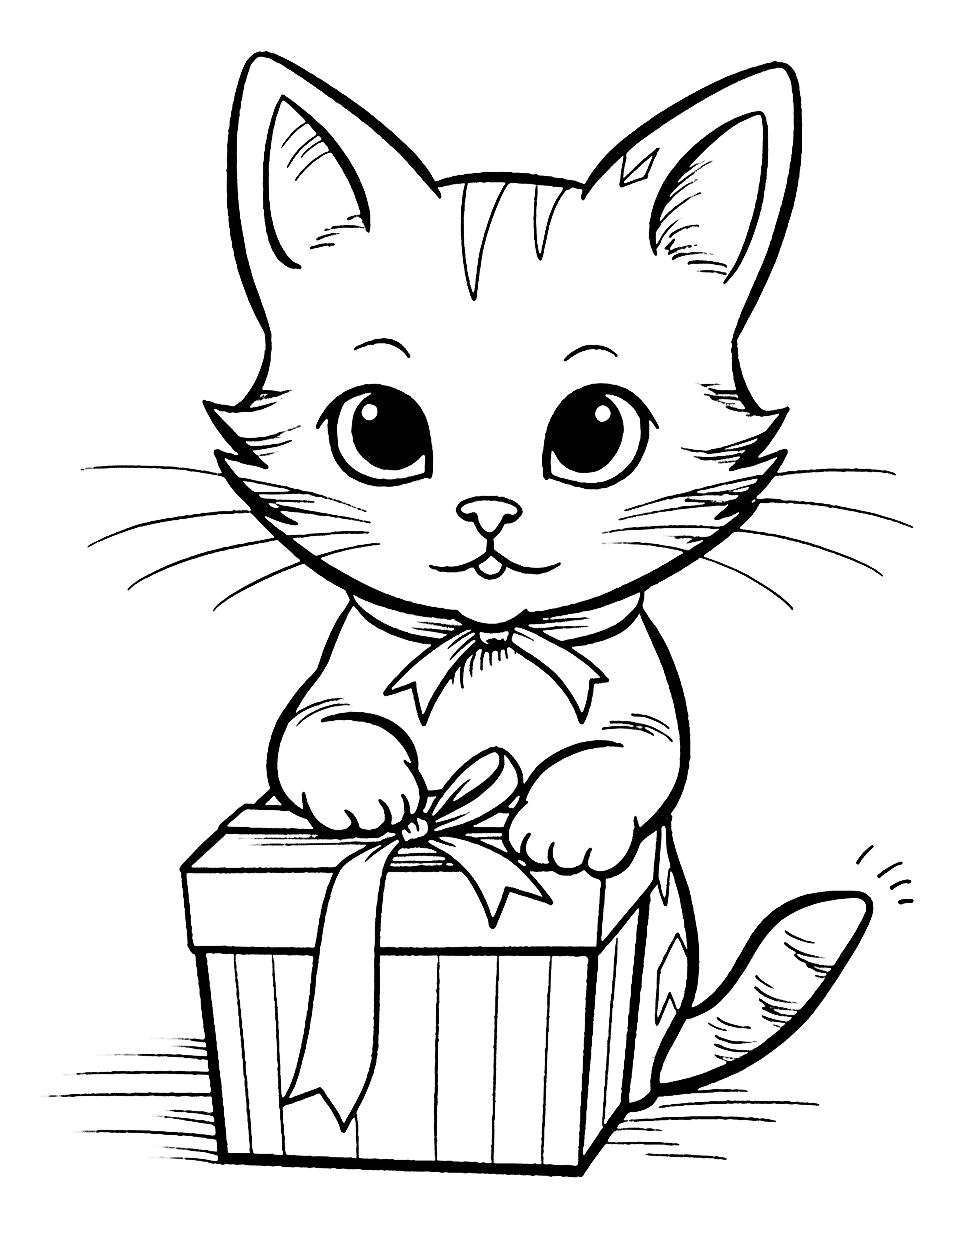 Christmas Cat and a Gift Box Coloring Page - A cute cat opening his Christmas gift box with a beautiful ribbon.